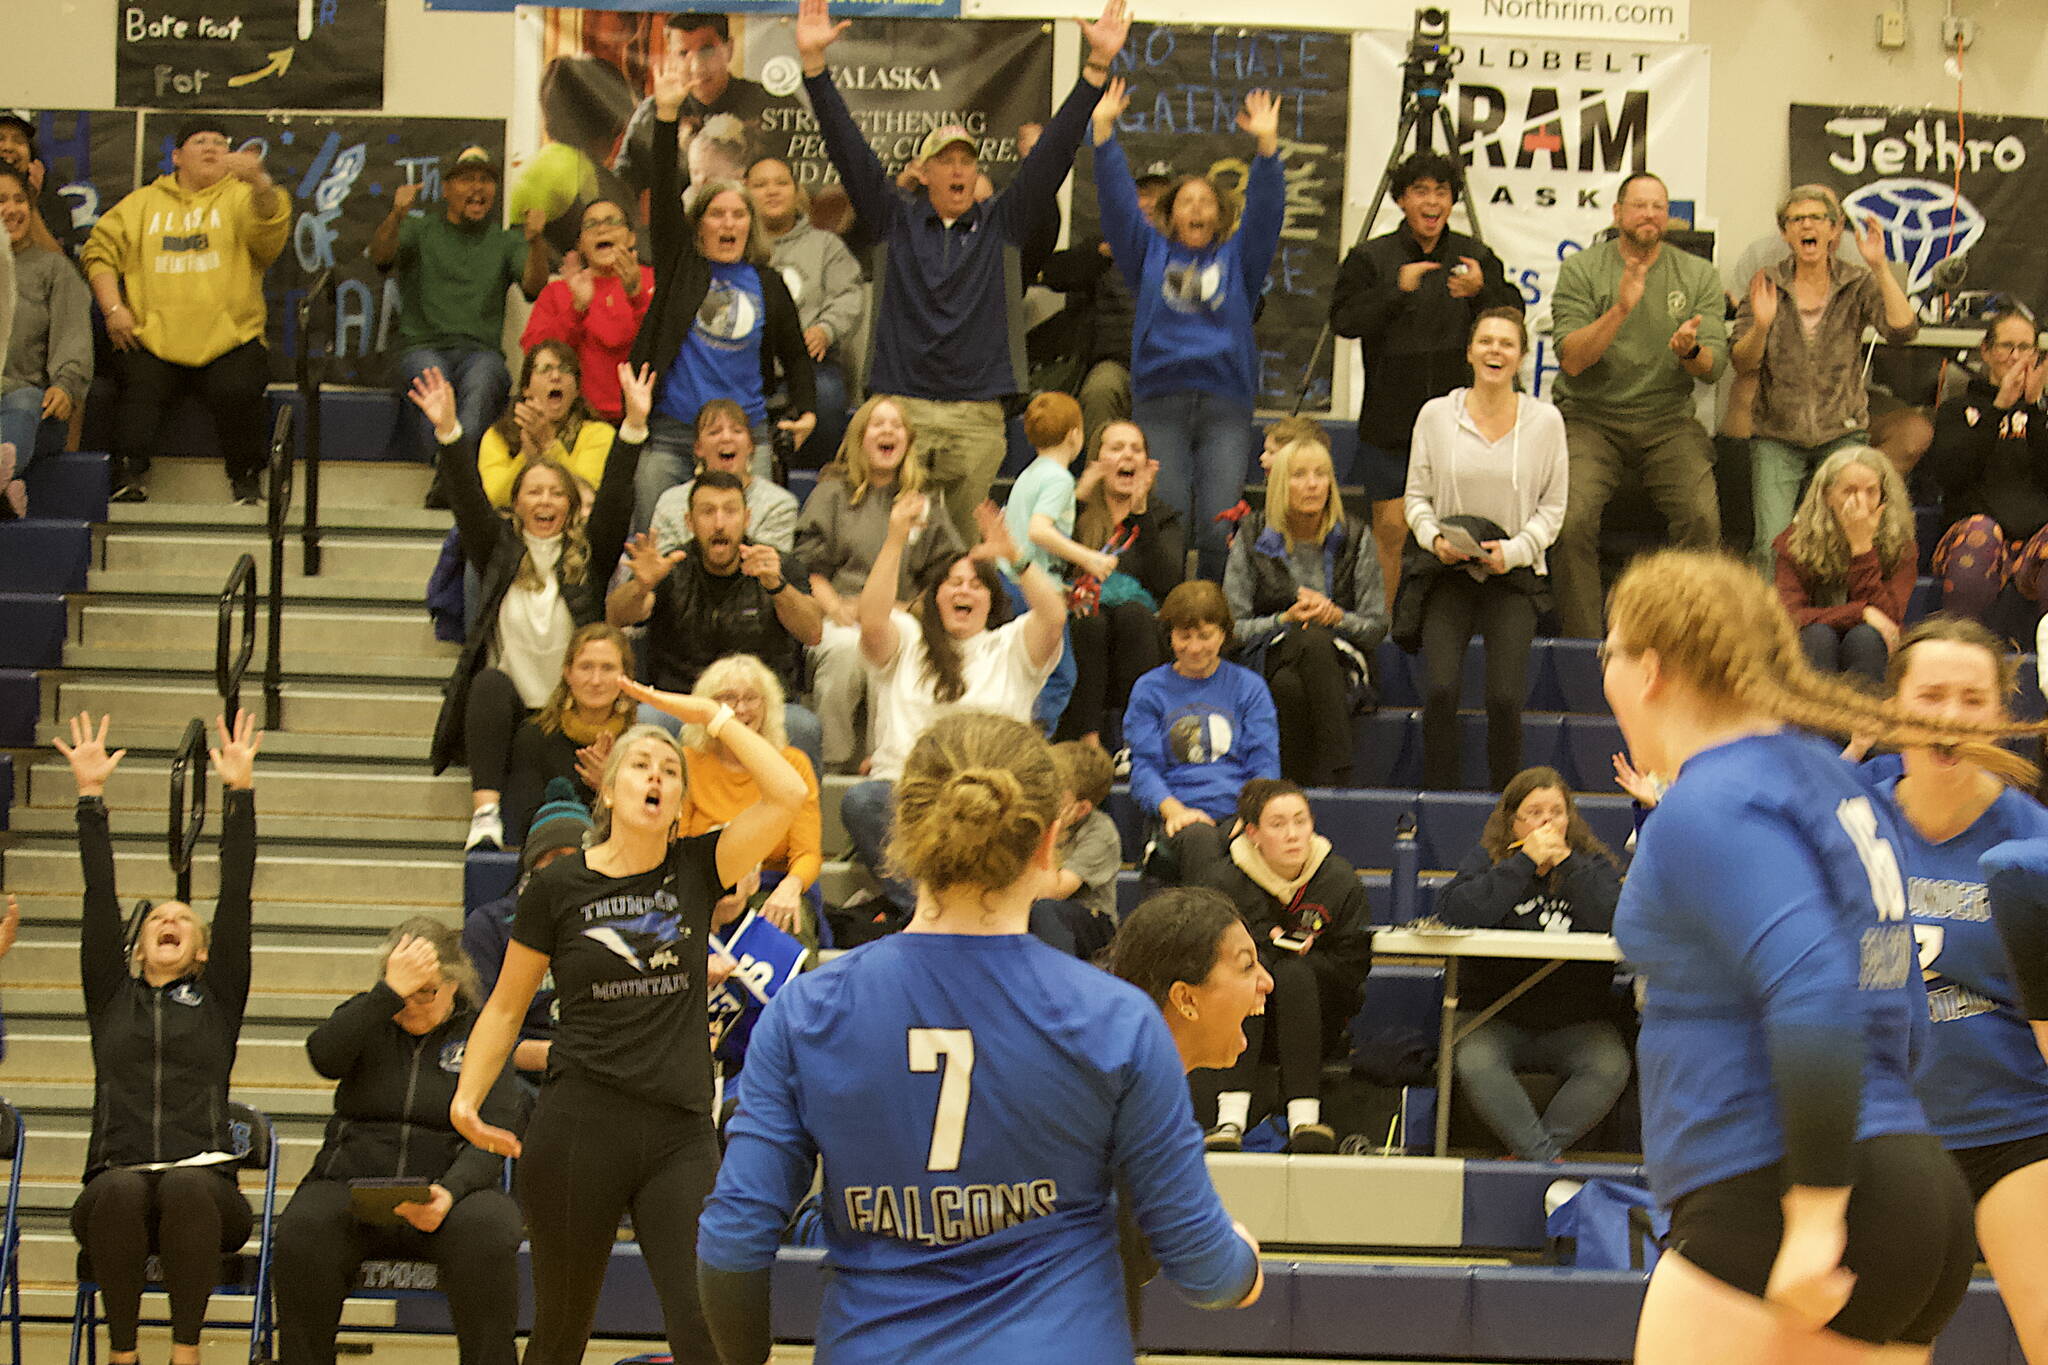 Thunder Mountain High School players and spectators celebrate as the Falcons score the winning point to prevail in a five-set series over Ketchikan High School on Saturday night. (Mark Sabbatini / Juneau Empire)